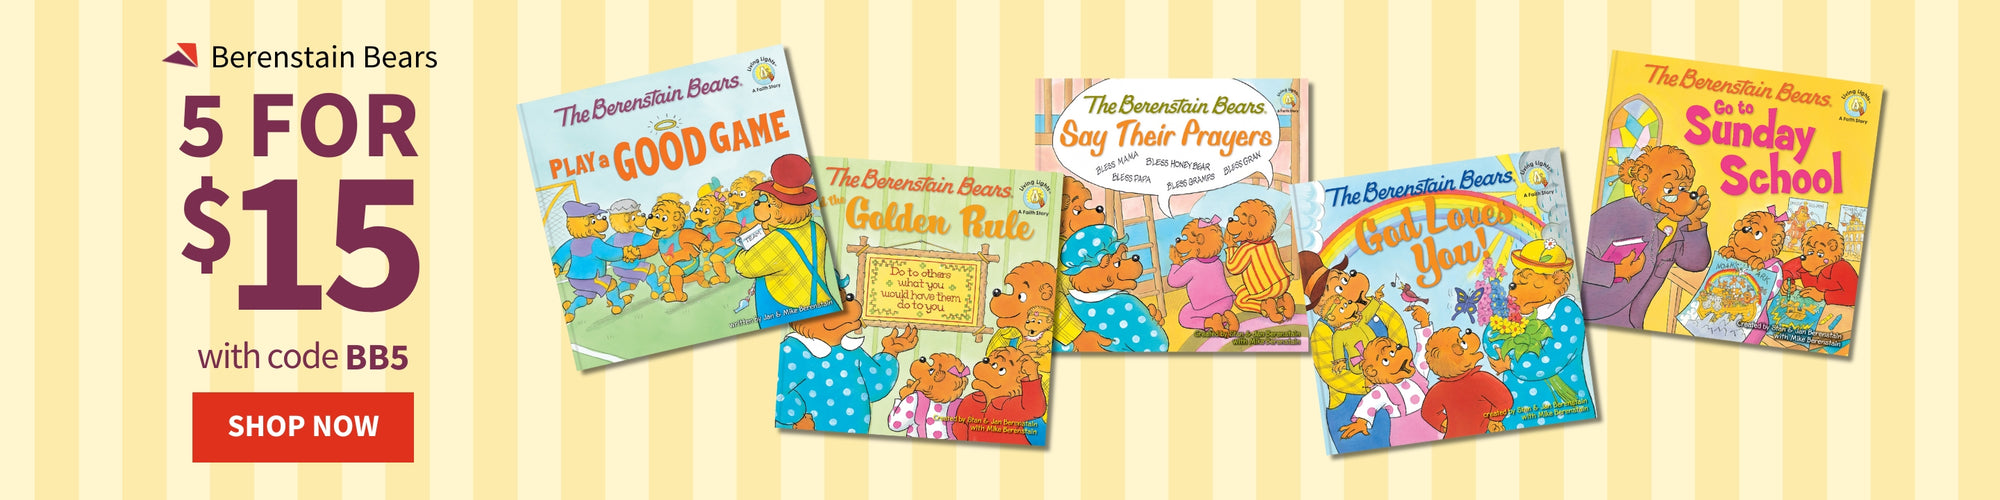 Berenstain Bears 5 for $15 with code BB5 - Shop Now